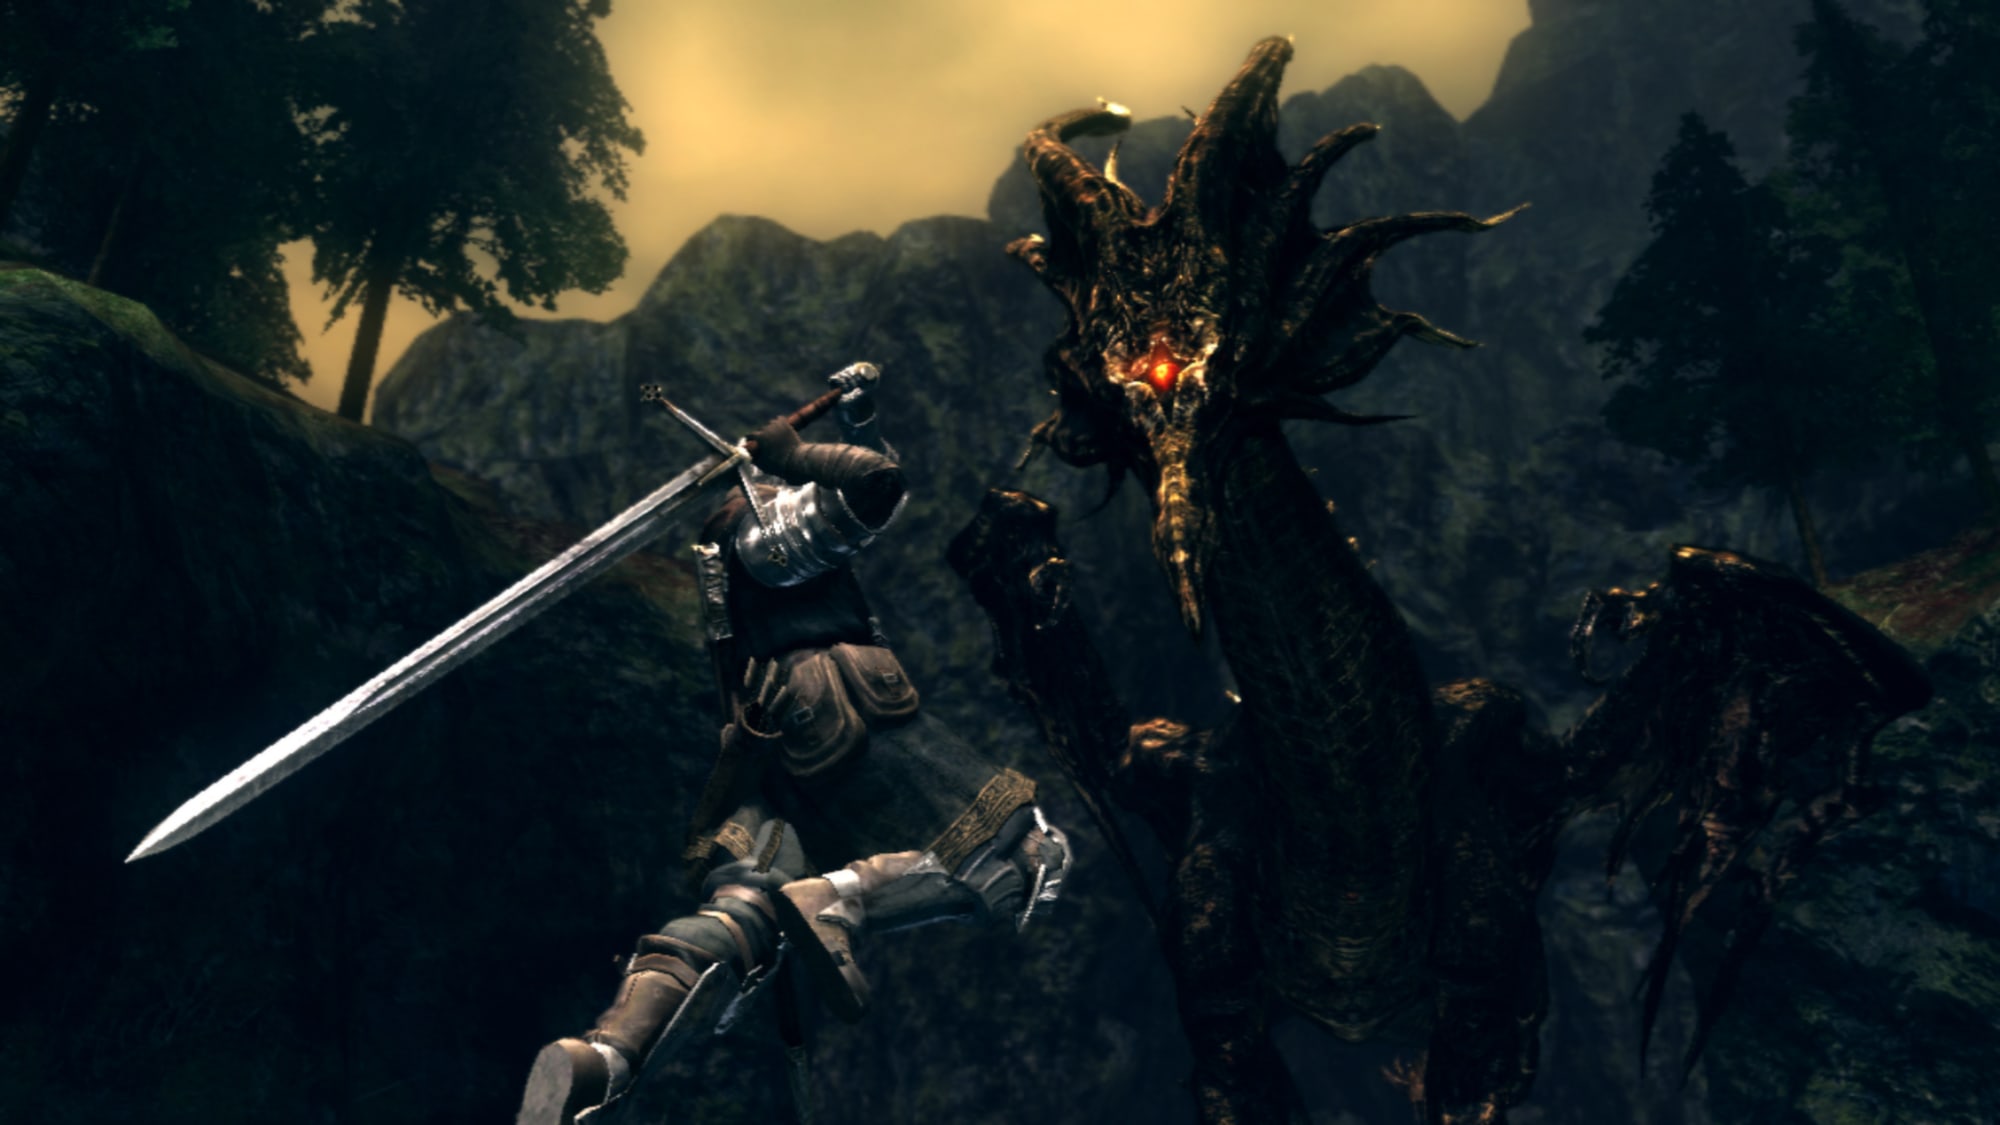 10 Years Ago, Dark Souls Changed Games Forever